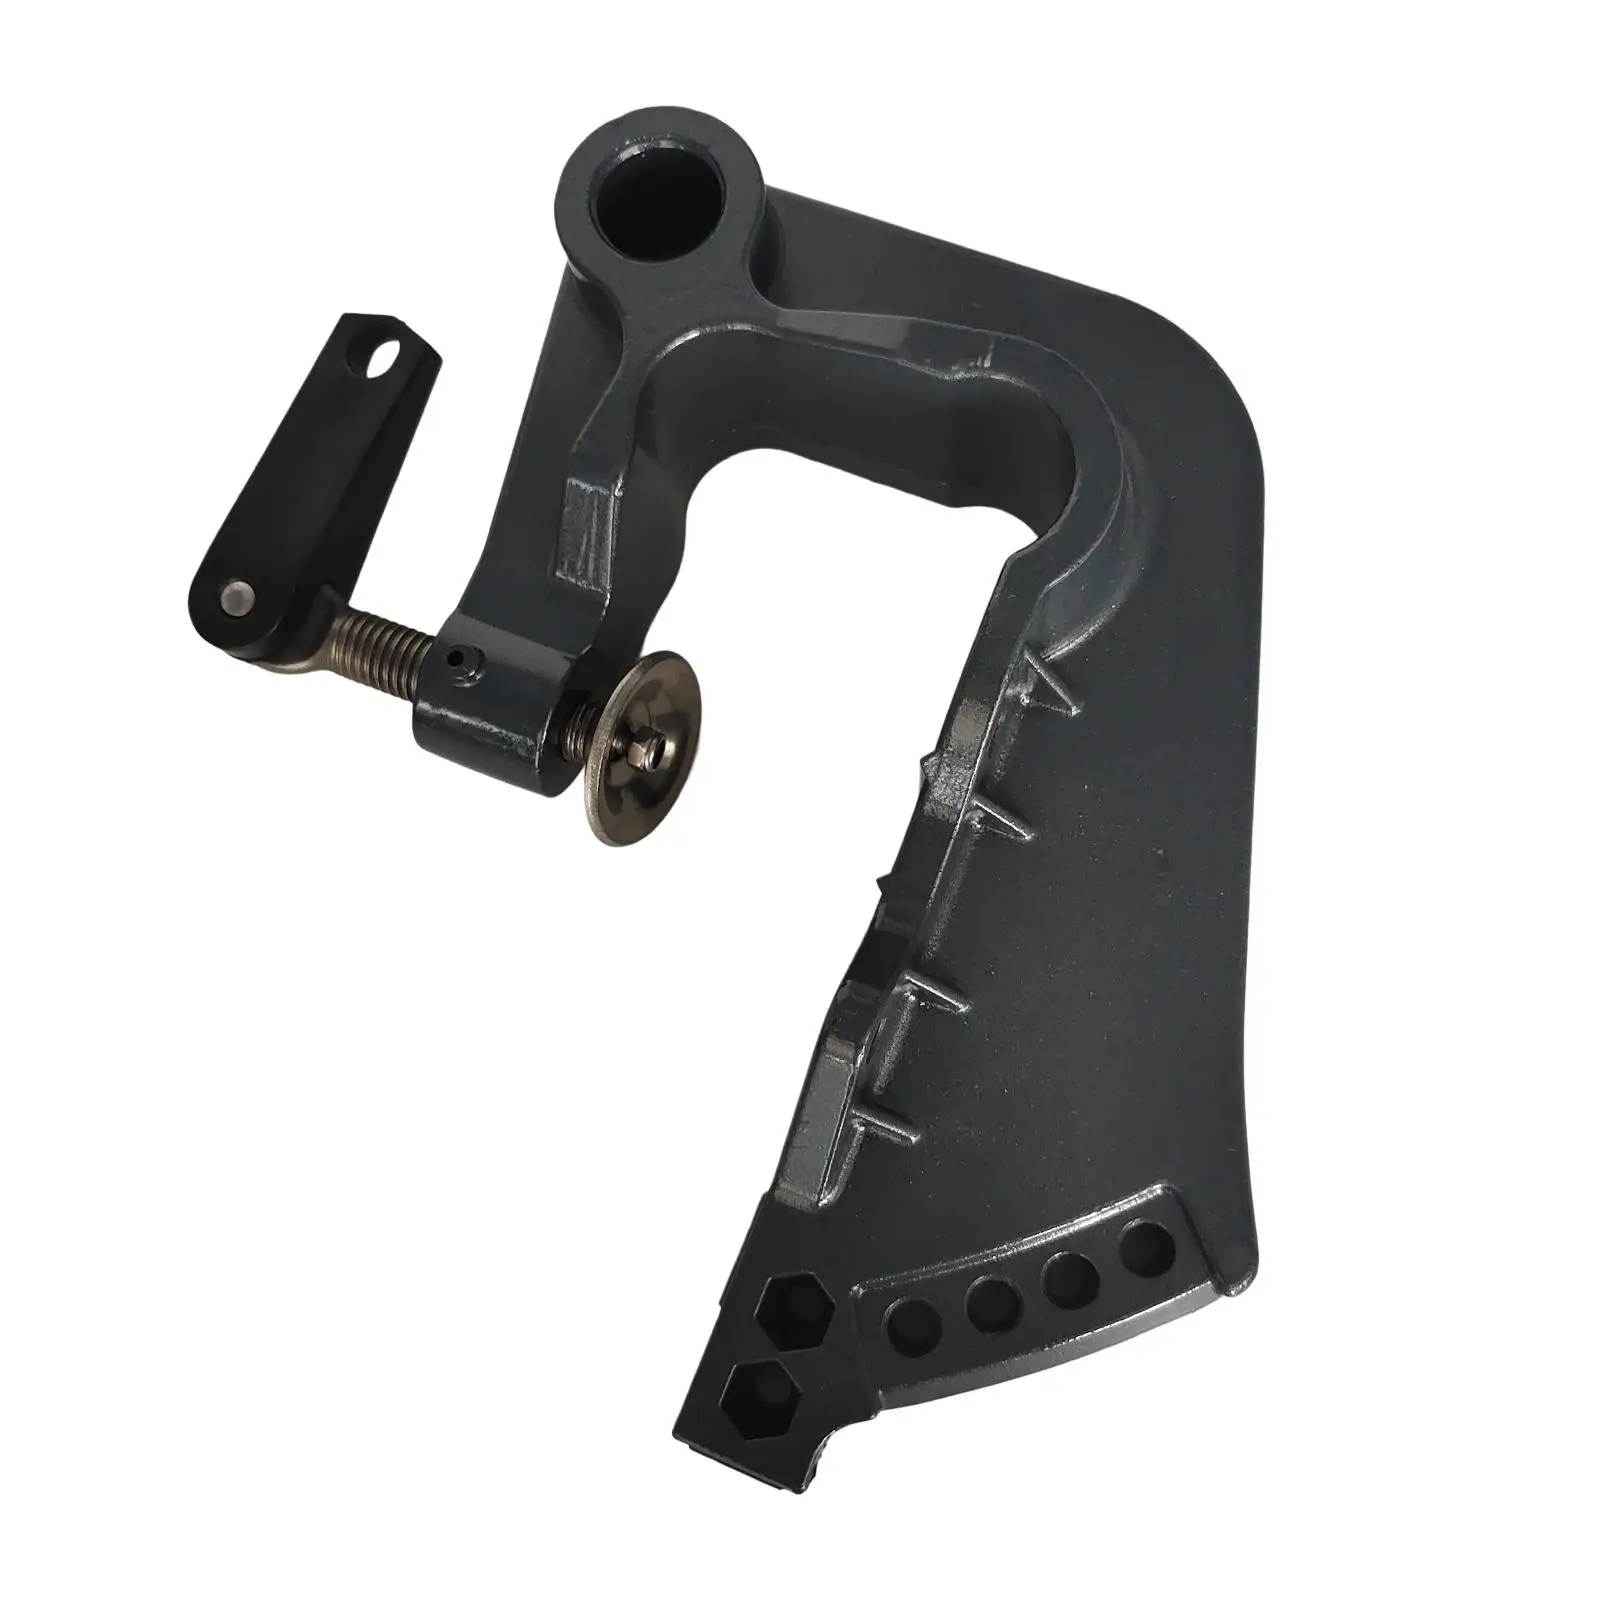 Outboard Motor Bracket Engines Repair Part Accessories Replacement of Yamaha 9.9 HP 15 HP 2 Stroke Sturdy